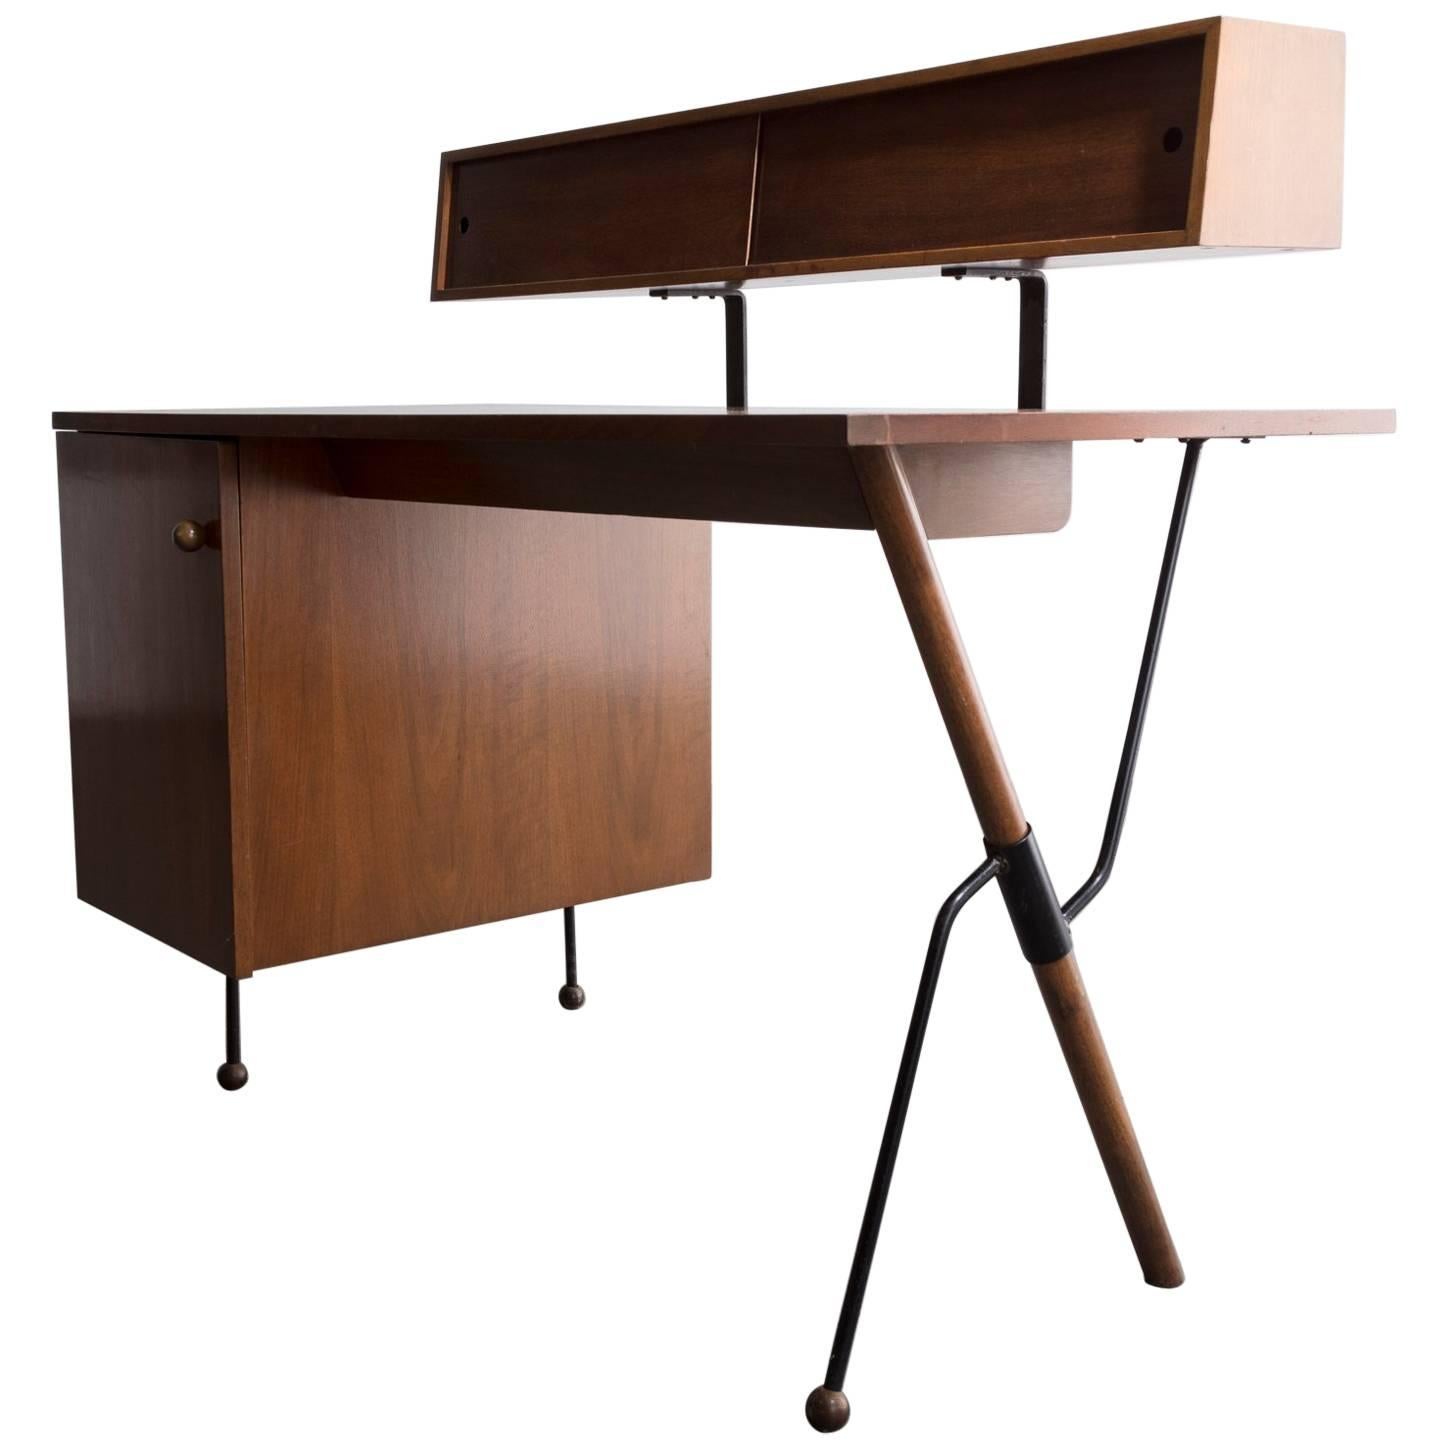 Desk in Walnut and Iron with Pencil Box, by Greta Magnusson Grossman, 1952